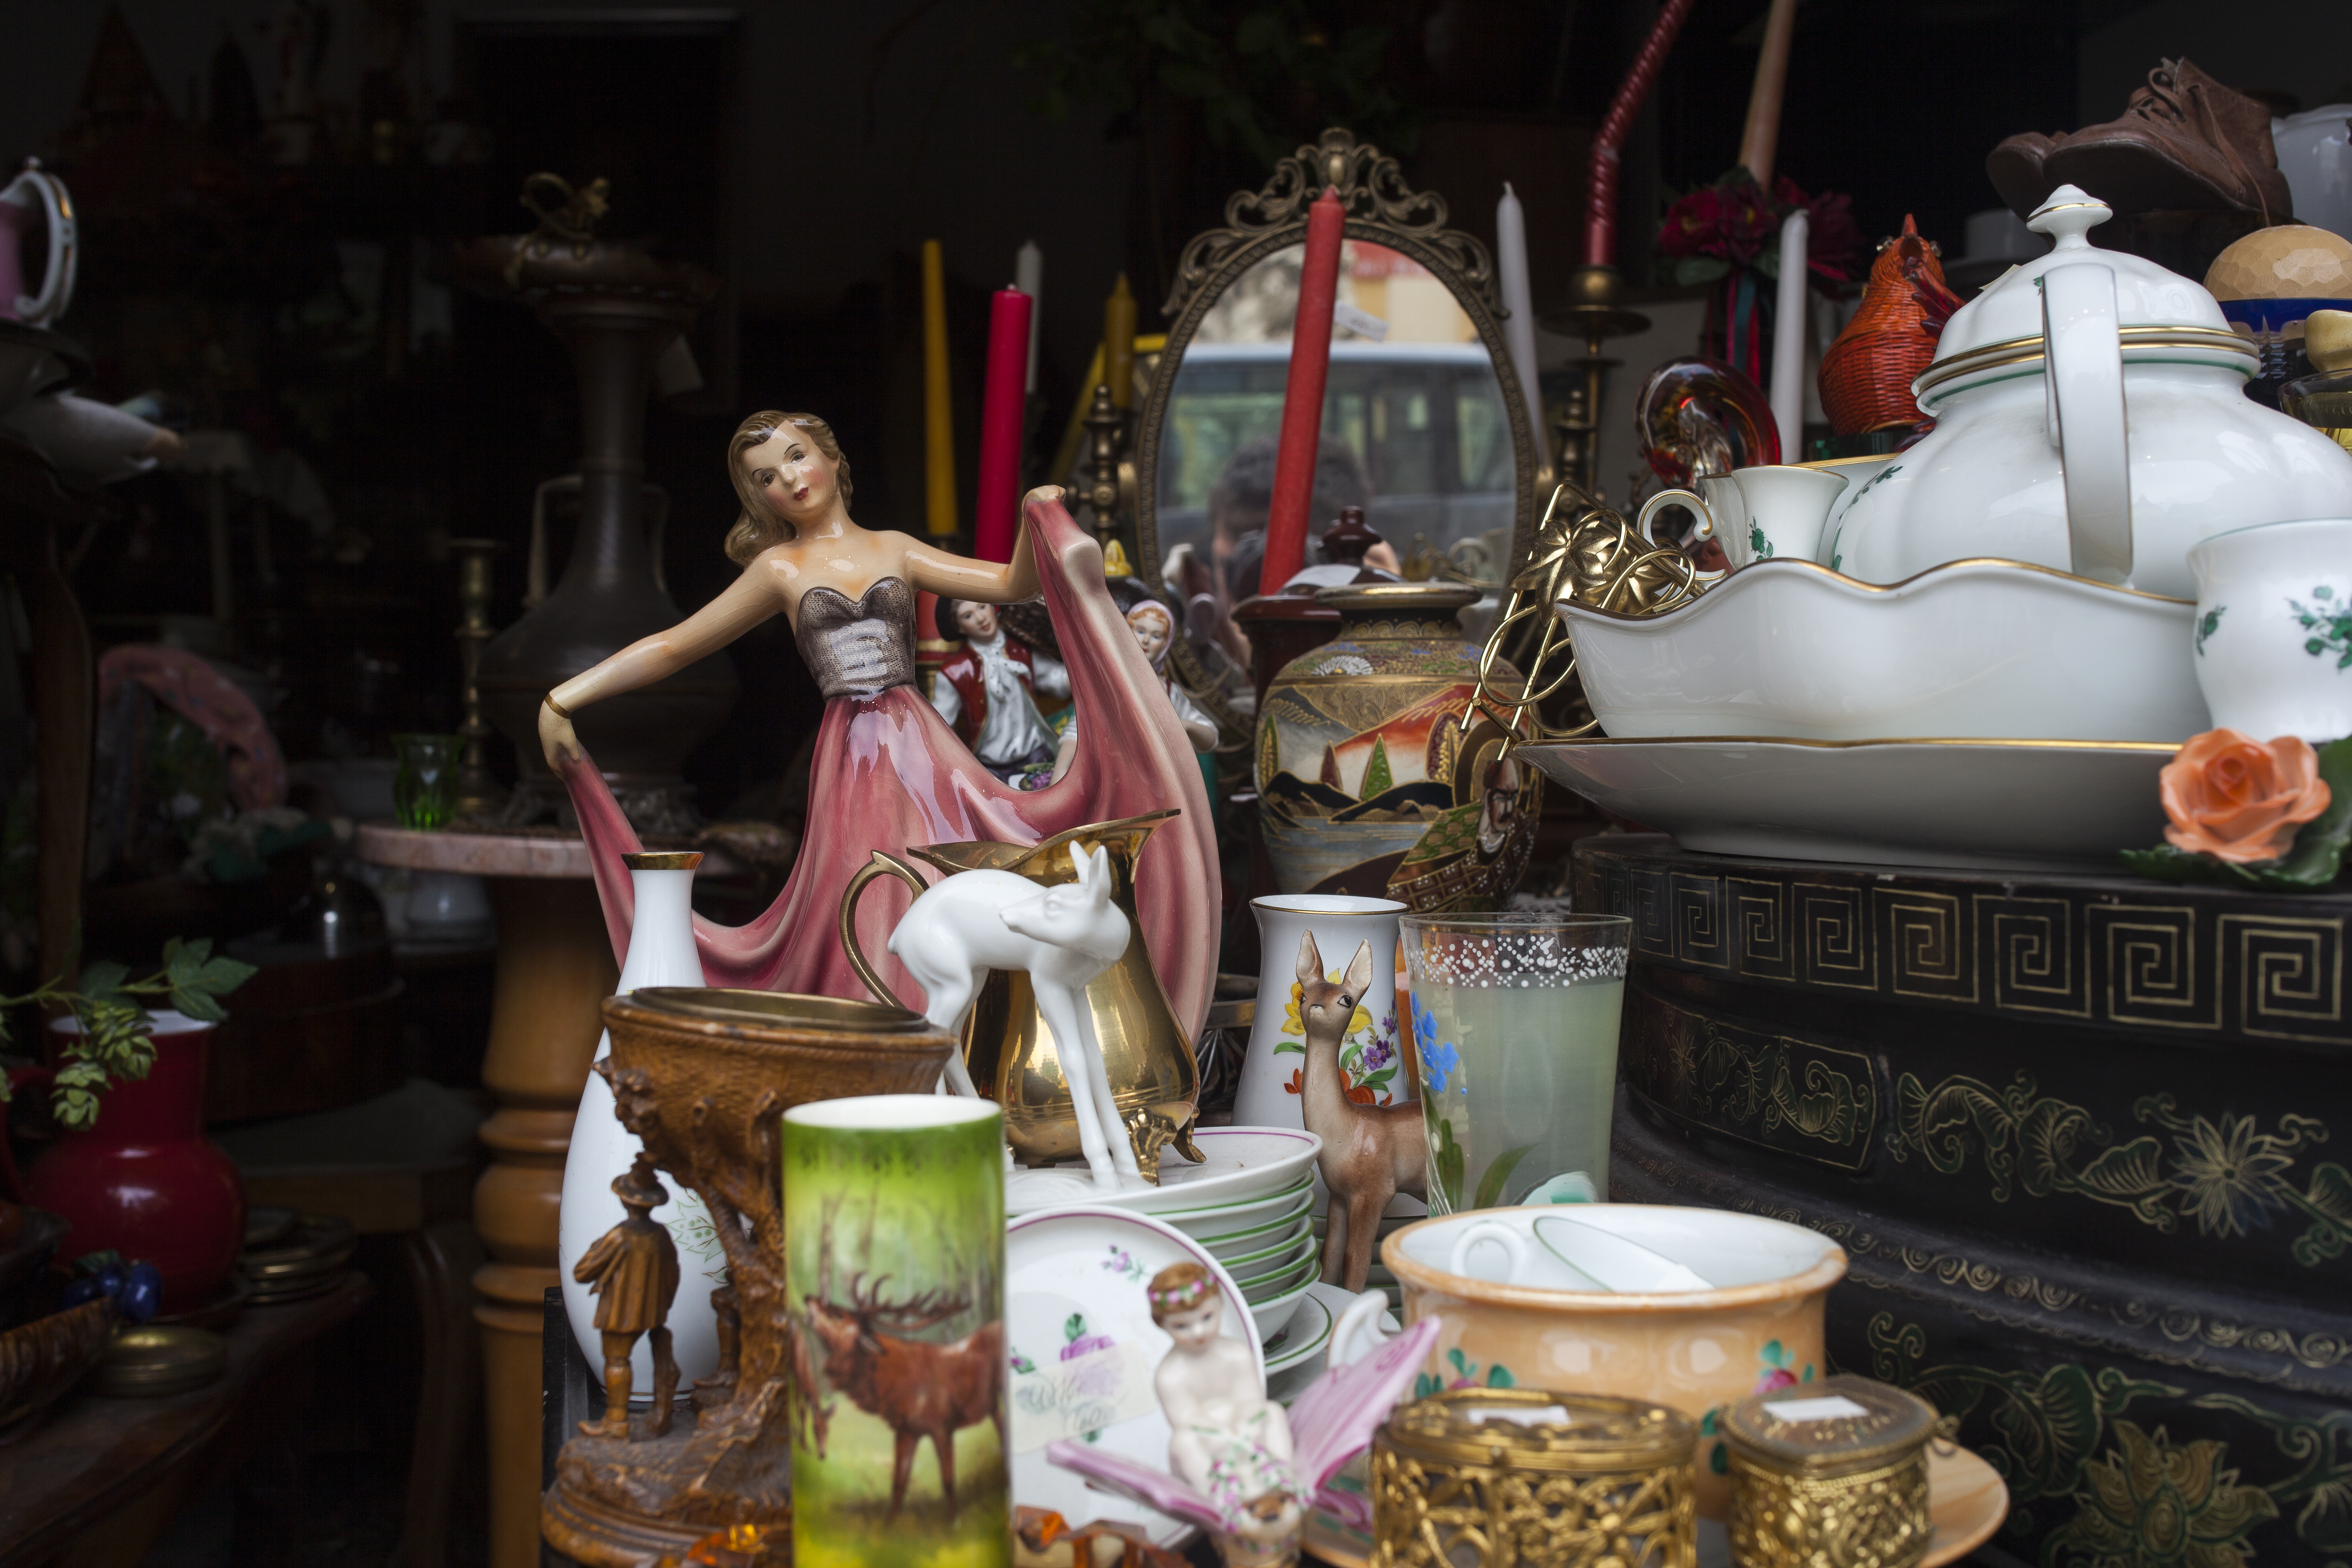 Vintage objects for sale at a garage sale | Source: Getty Images